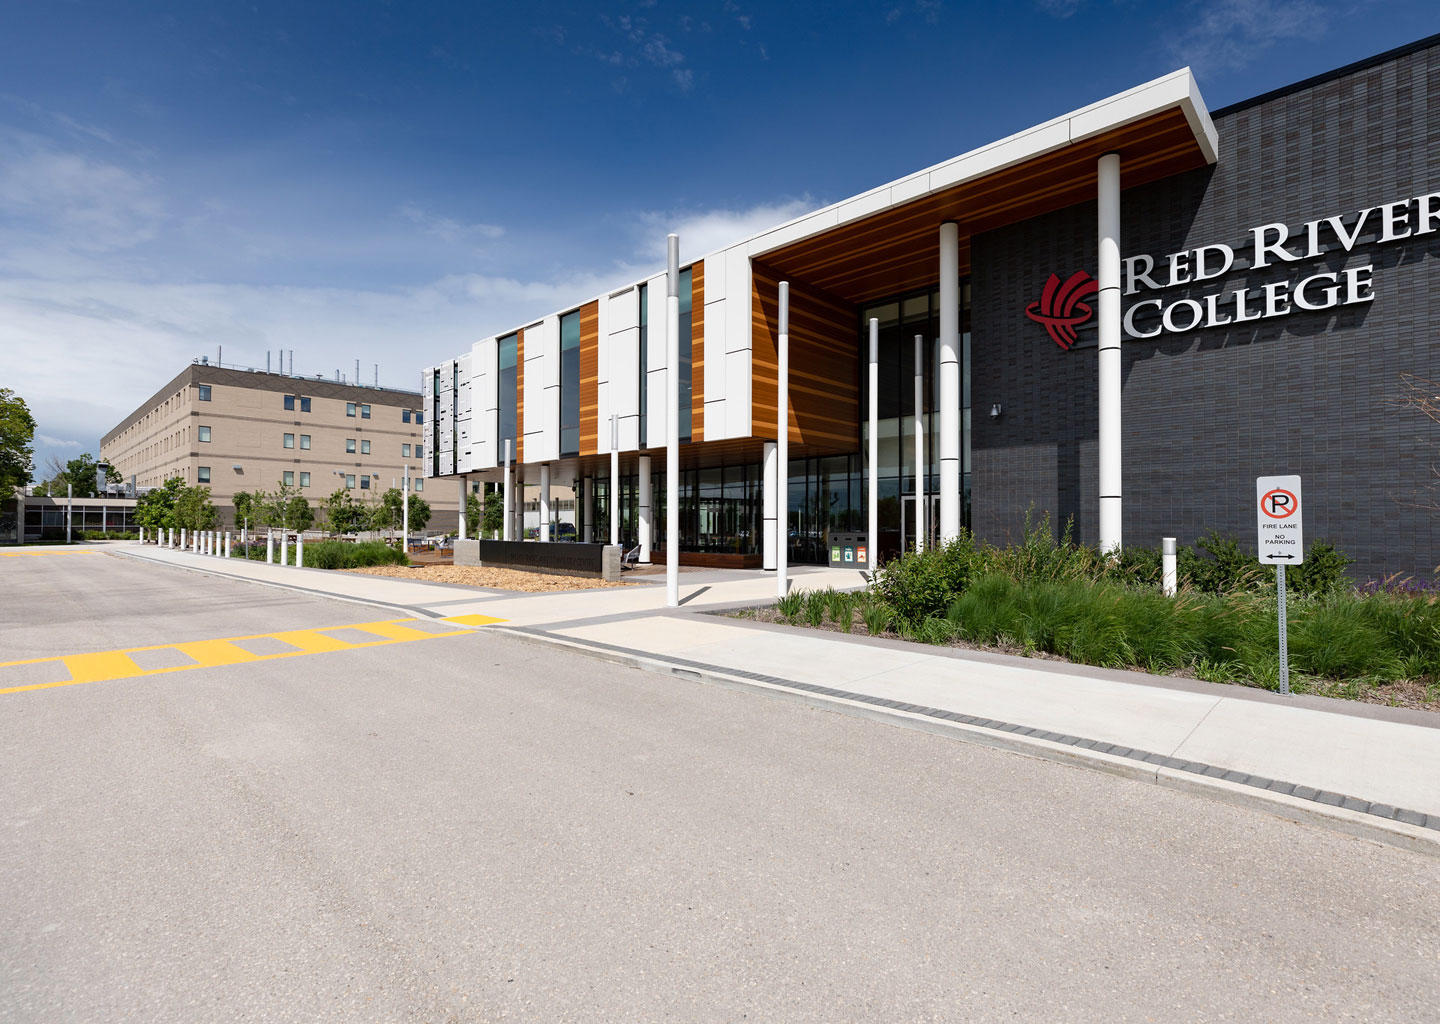 red-river-college-canada-course-information-rankings-and-reviews